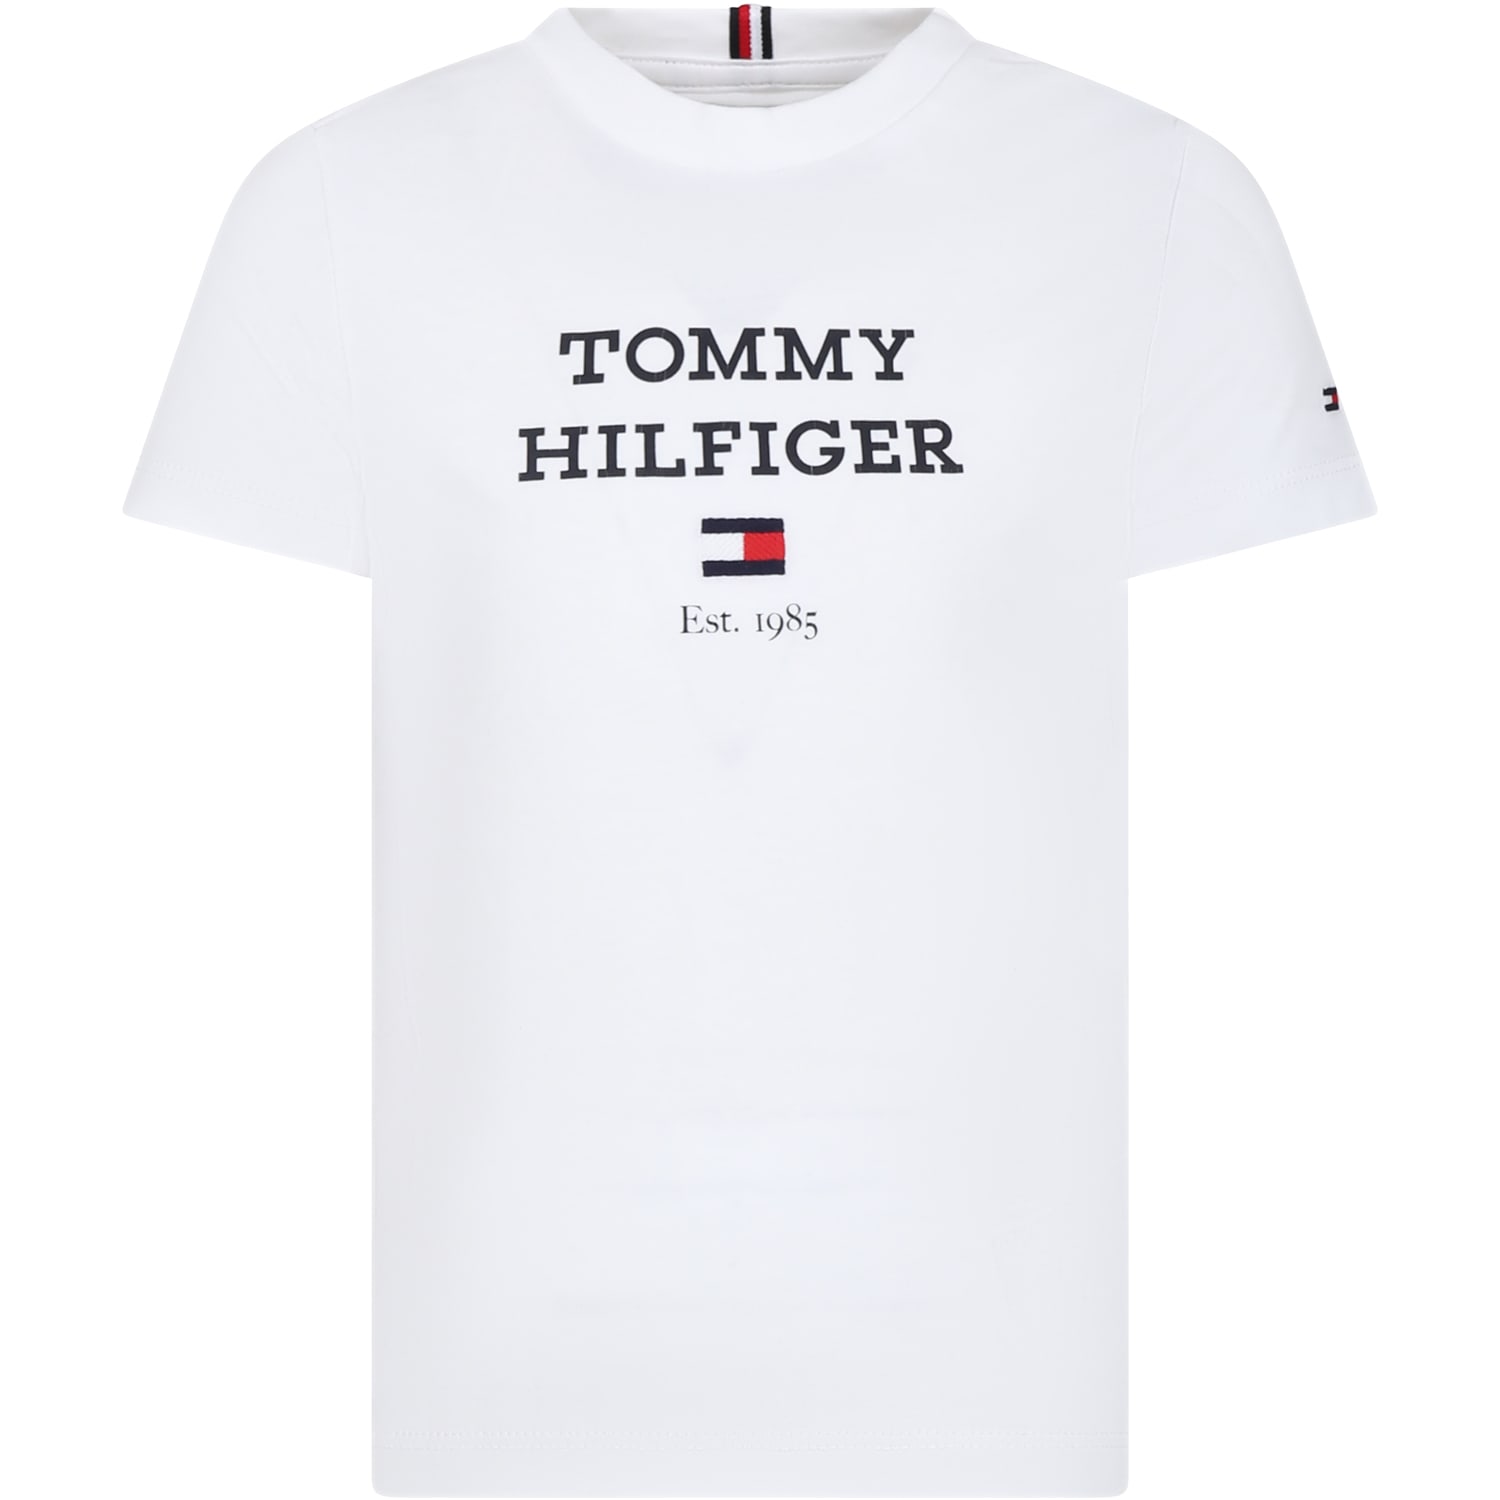 Tommy Hilfiger White T-shirt For Kids With Logo